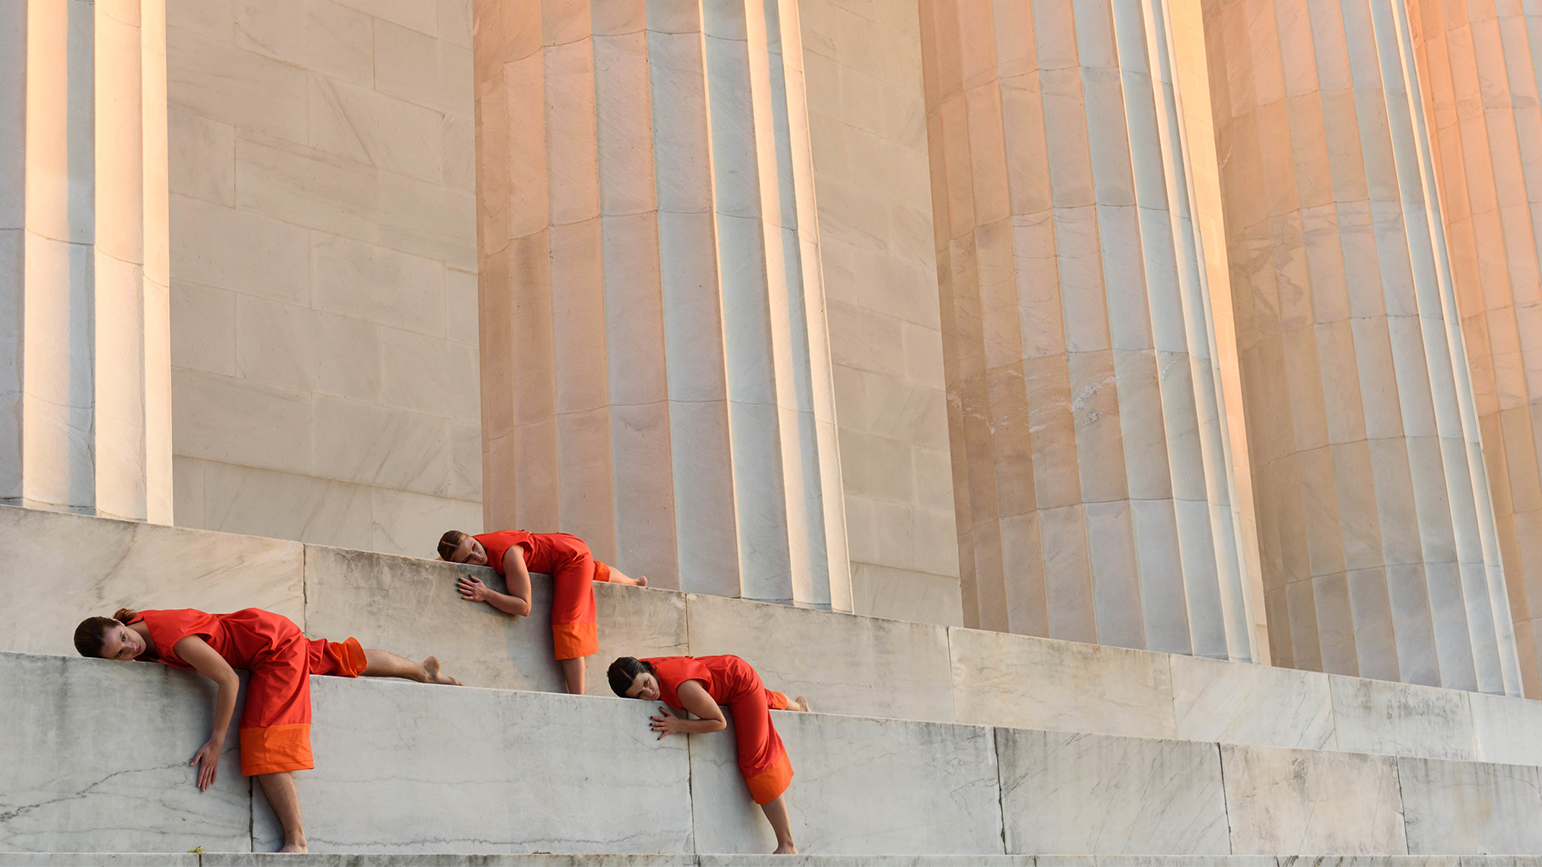 Women in orange jumpers lying on steps in front of a colonnade